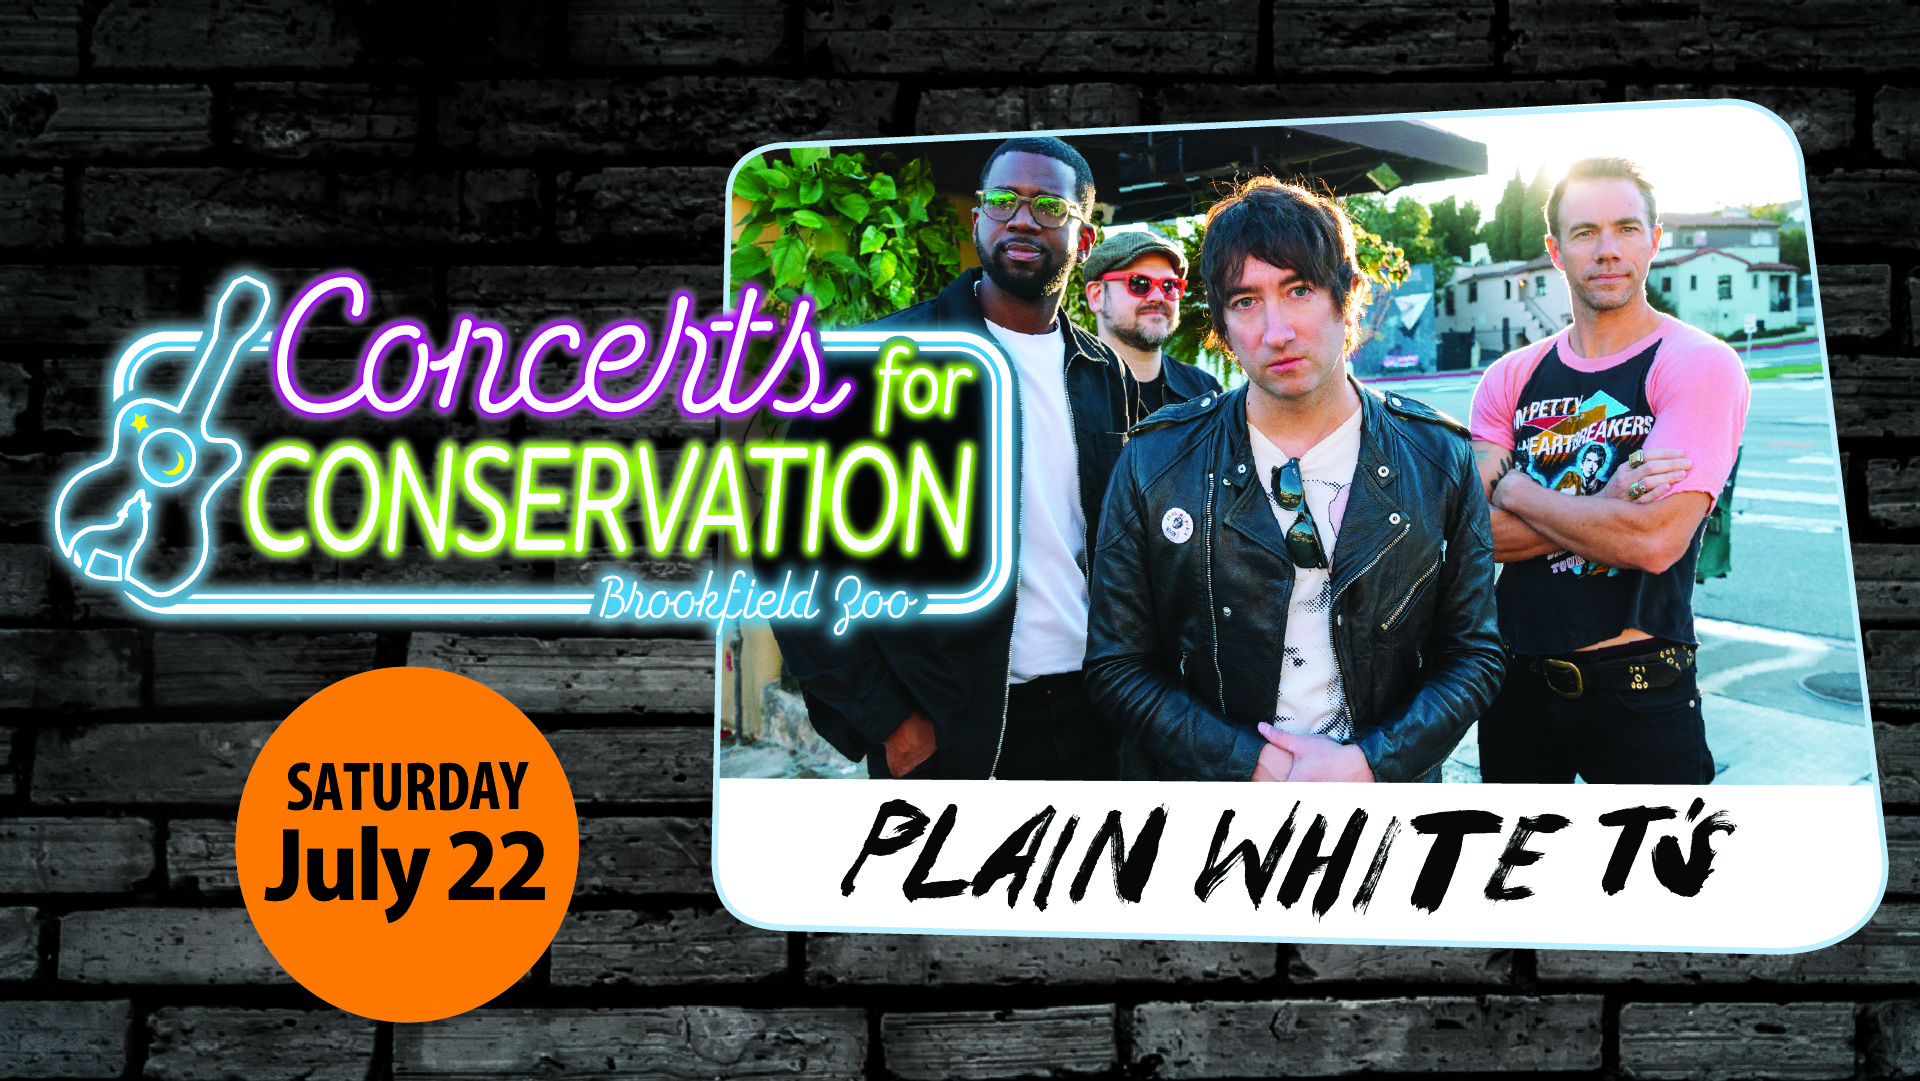 <h1 class="tribe-events-single-event-title">WIN Tickets and Parking to see the Plain White T’s</h1>